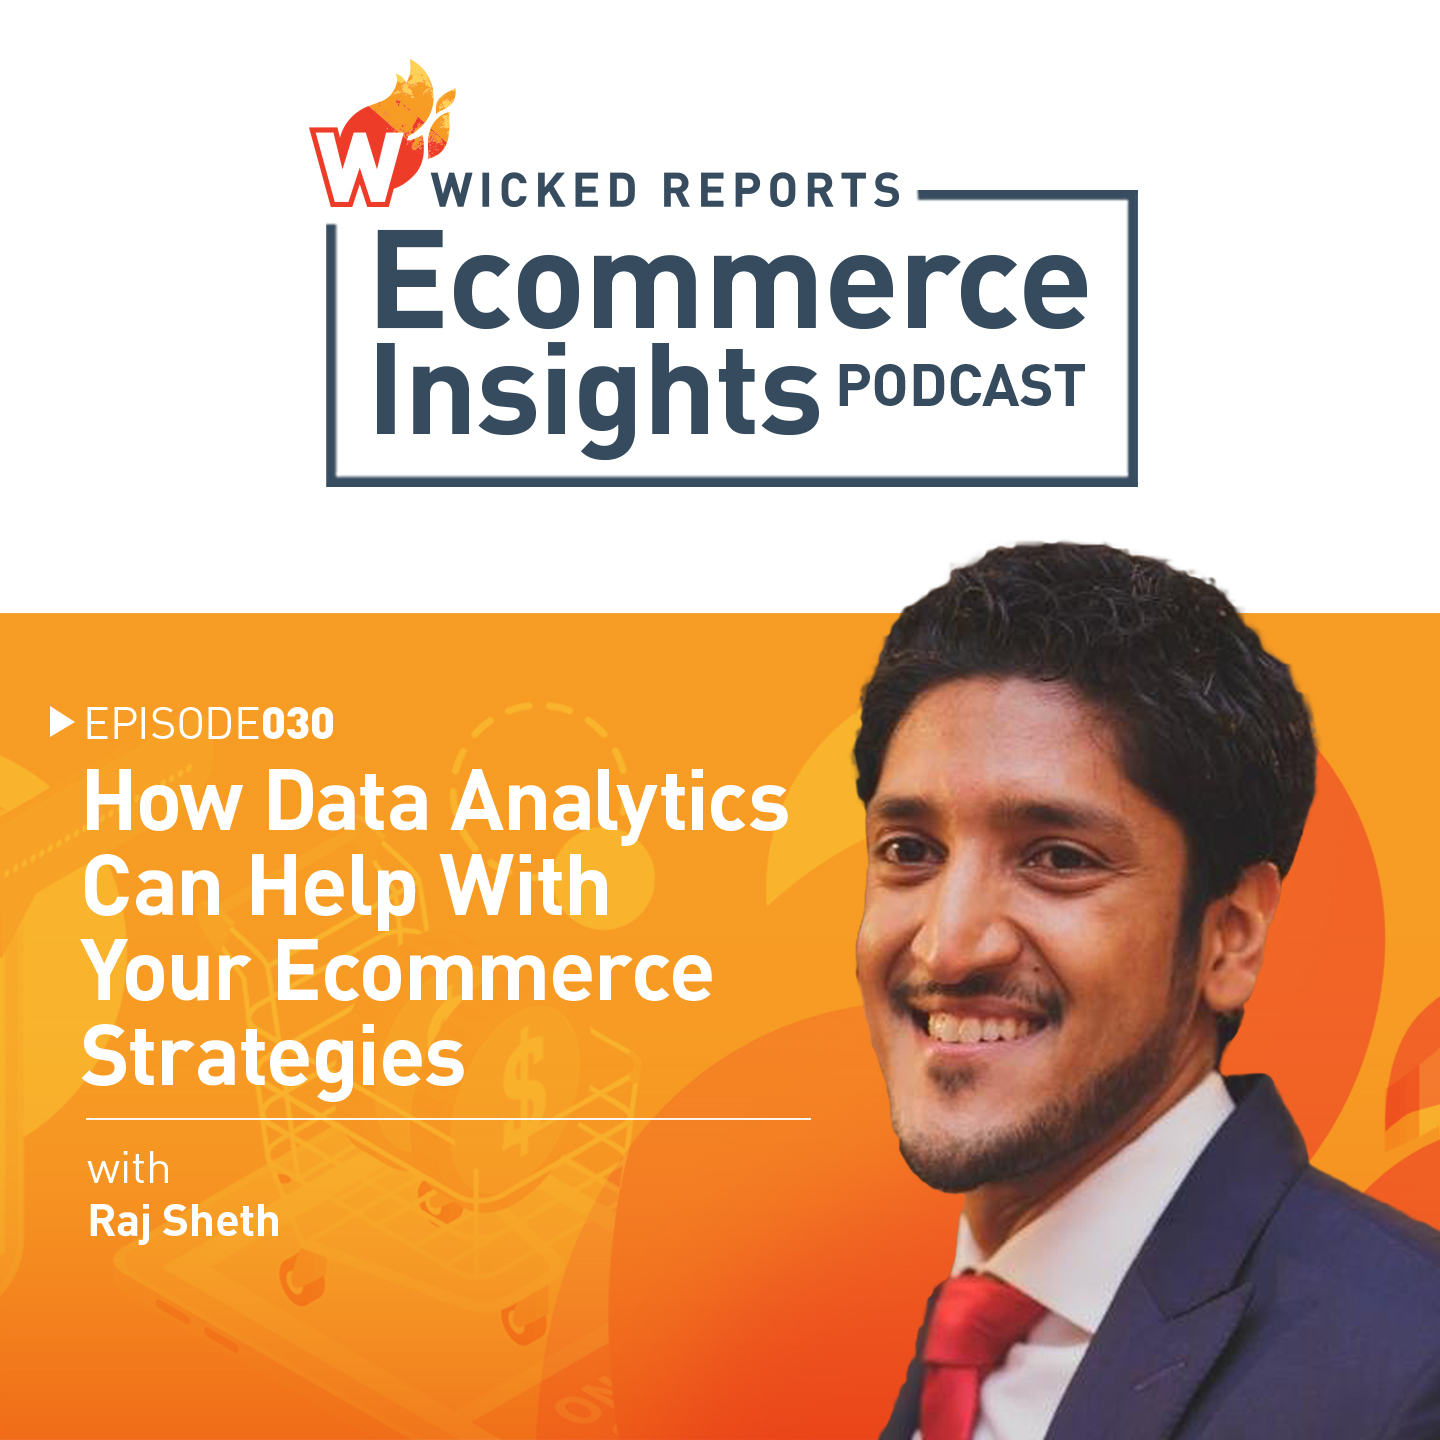 How Data Analytics Can Help With Your Ecommerce Strategies with Raj Sheth